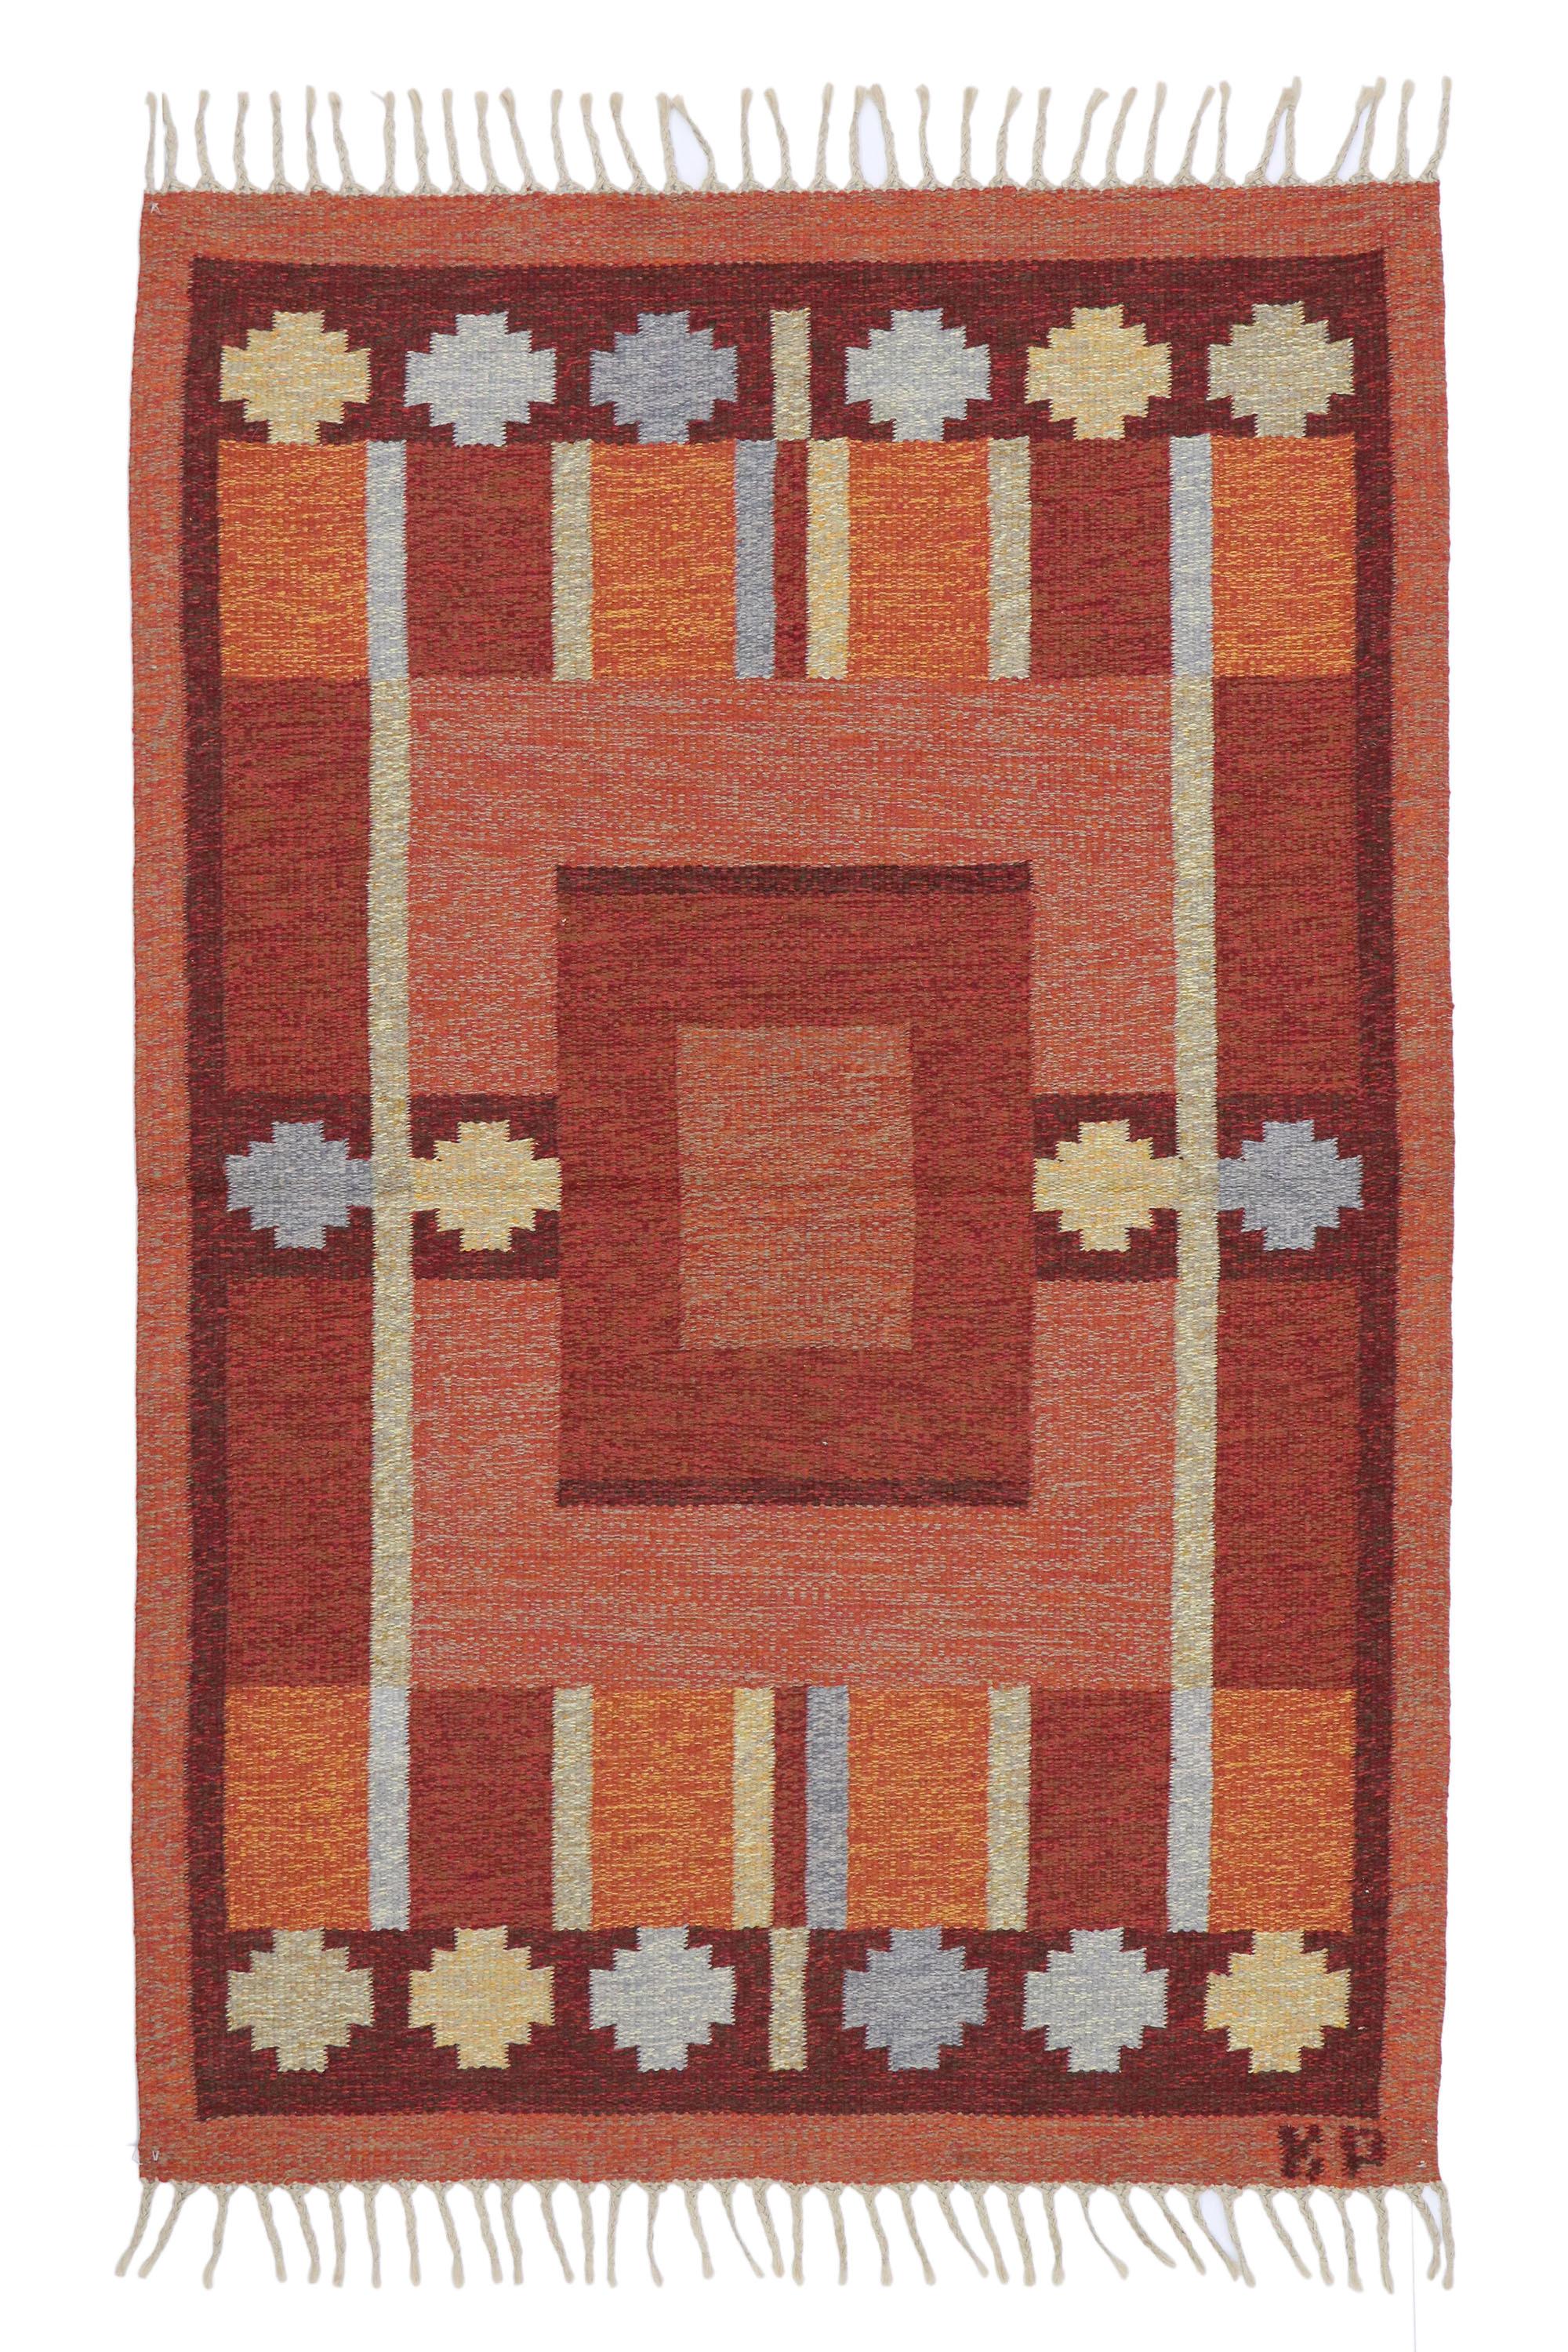 Vintage Swedish Kilim Rug with Scandinavian Modern Style by Kerstin Persson  For Sale 5